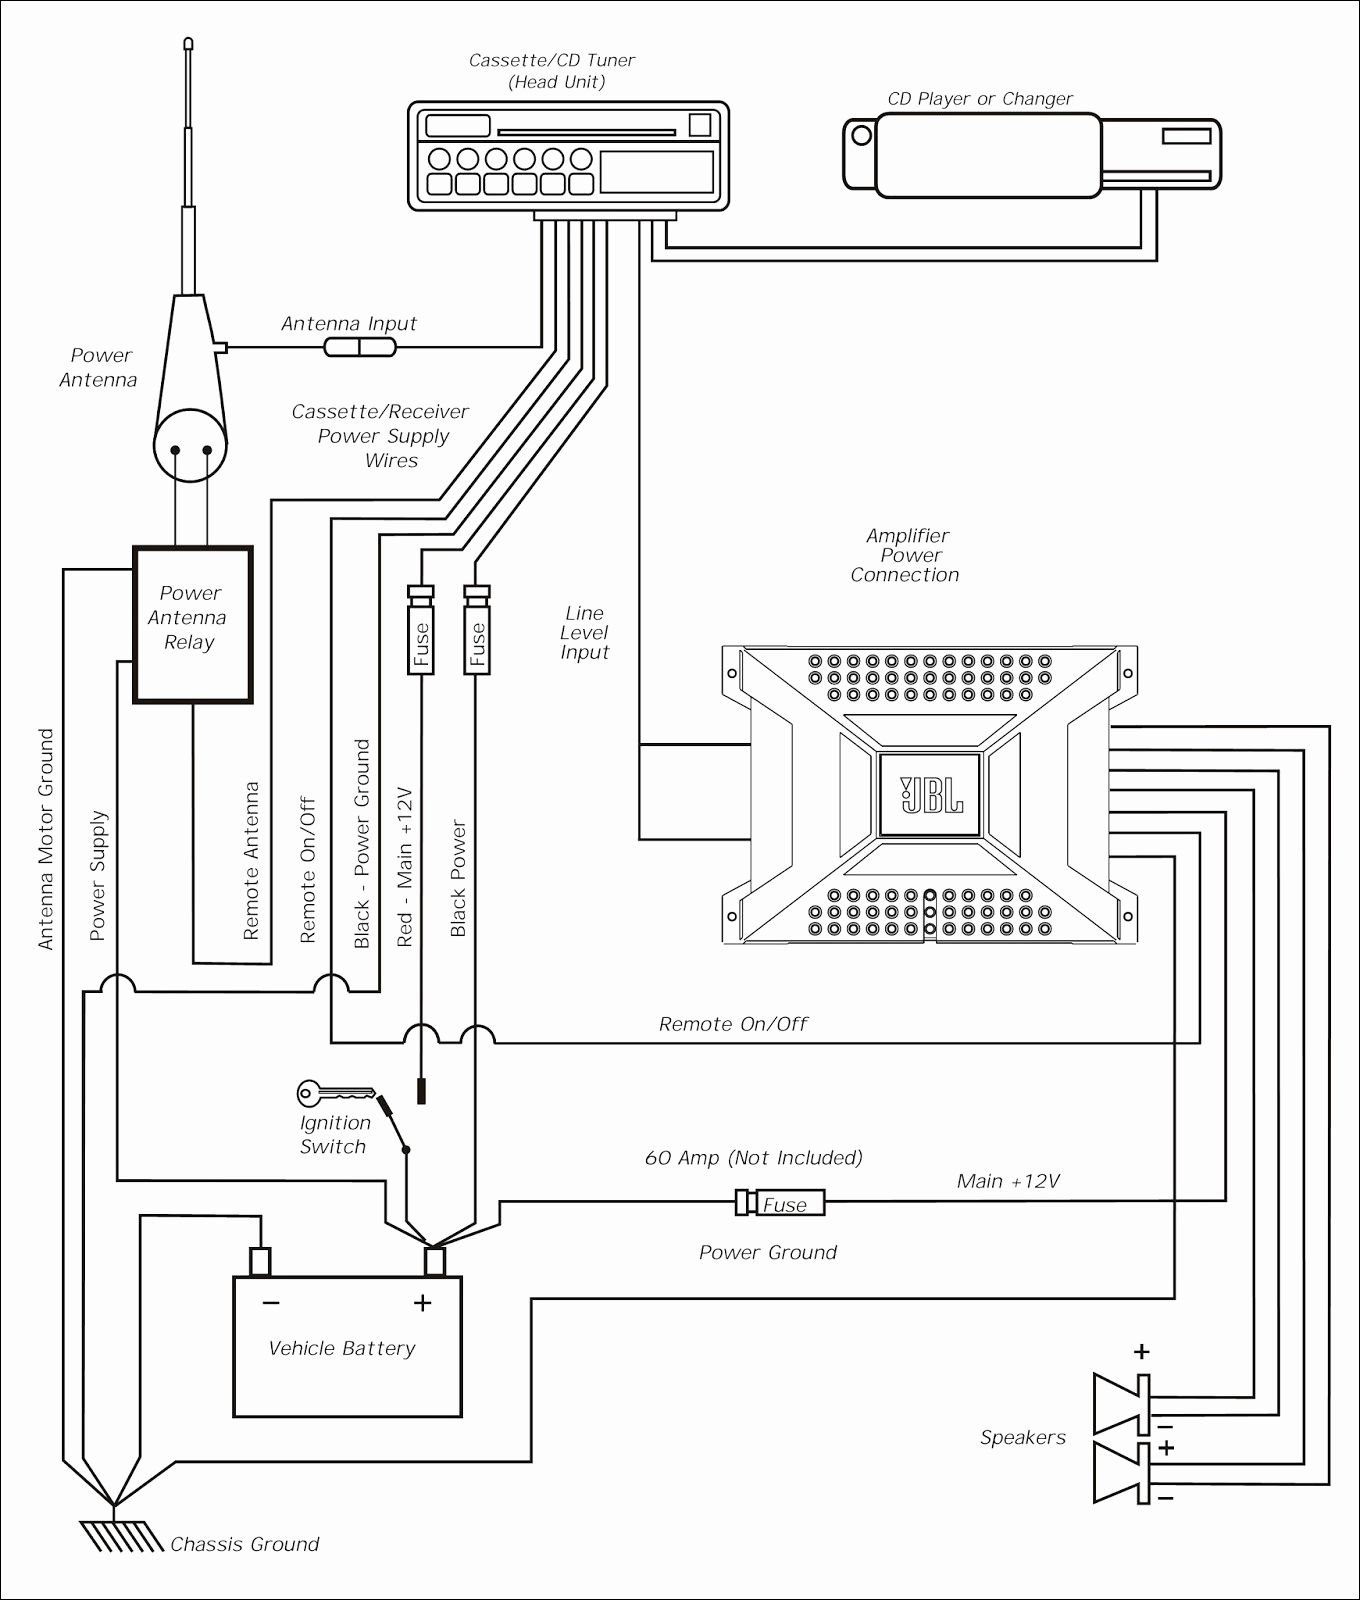 2003 Chevy Suburban Wiring Diagram Awesome 2002 Chevy Trailblazer - 2002 Chevy Suburban Radio Wiring Diagram